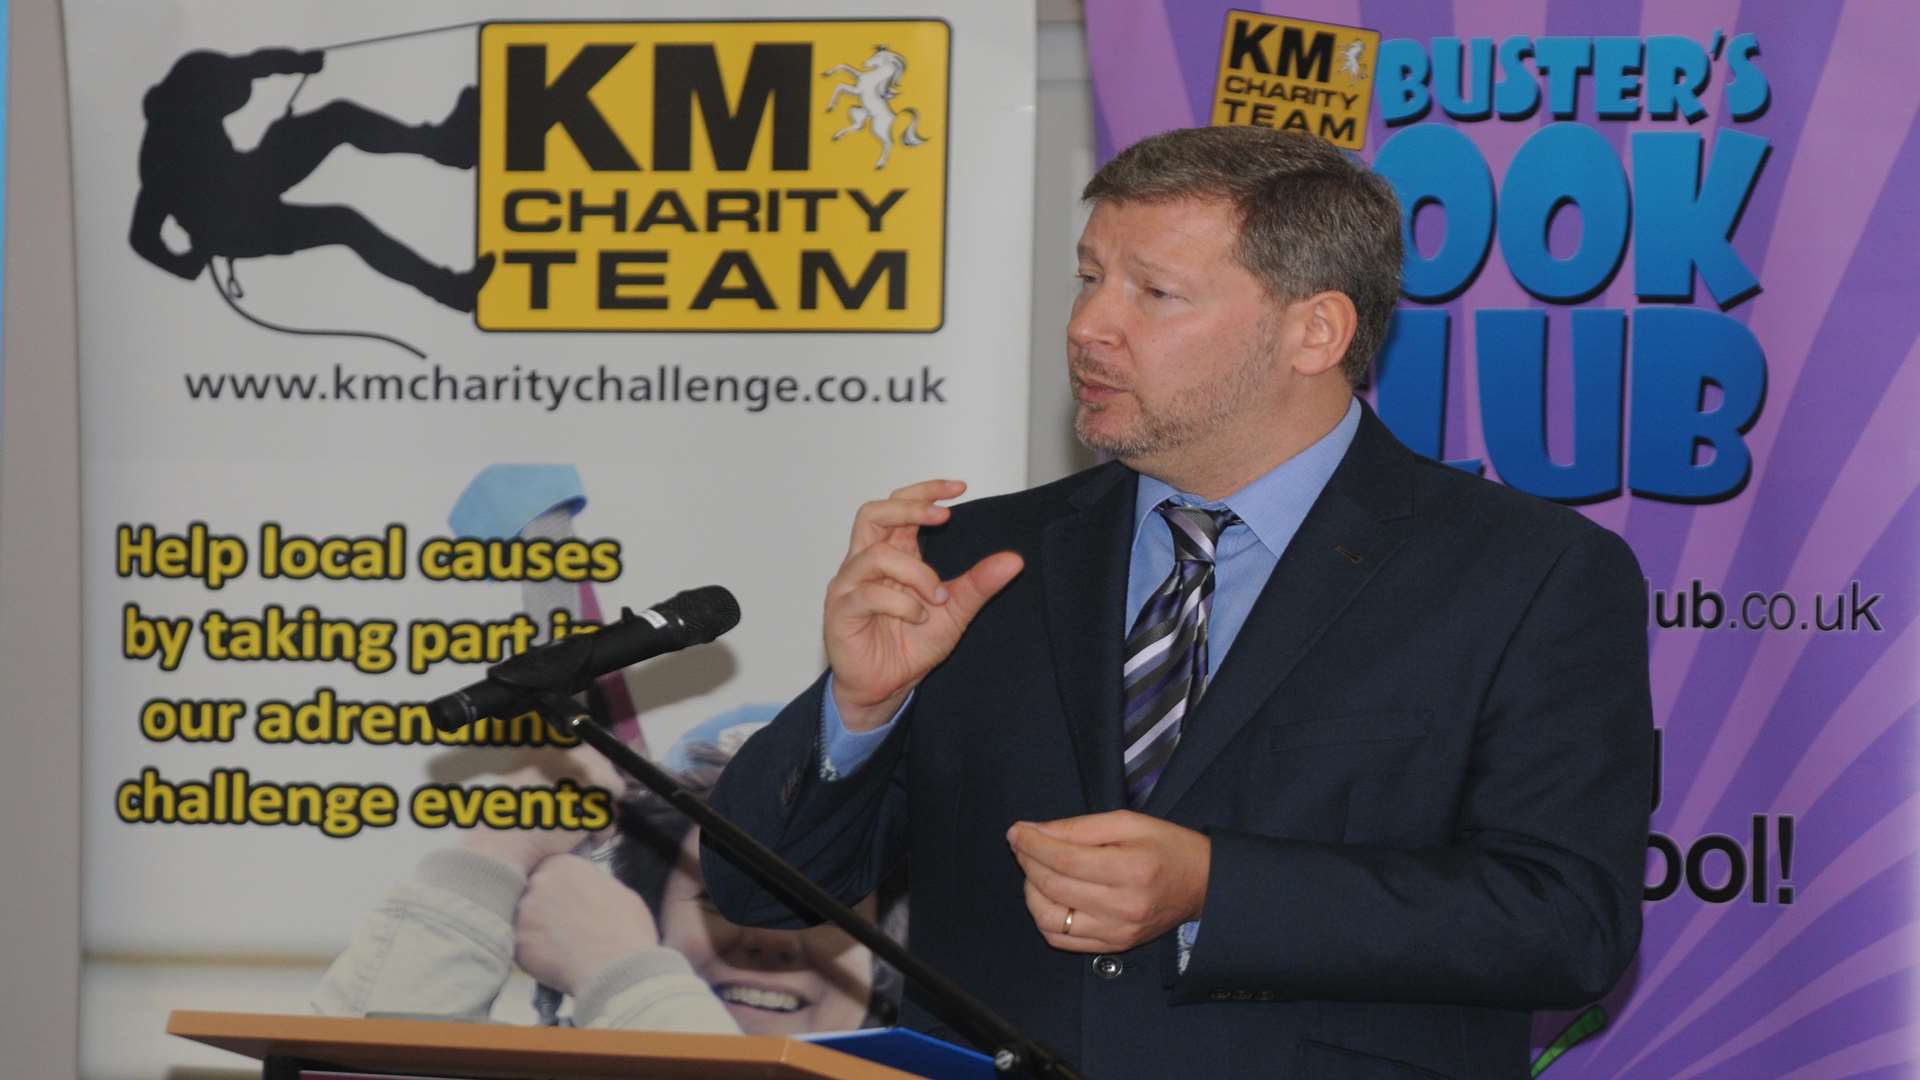 Simon Dolby of the KM Charity Team will be a guest speaker at the Kent Women Mean Business Network event on Thursday.